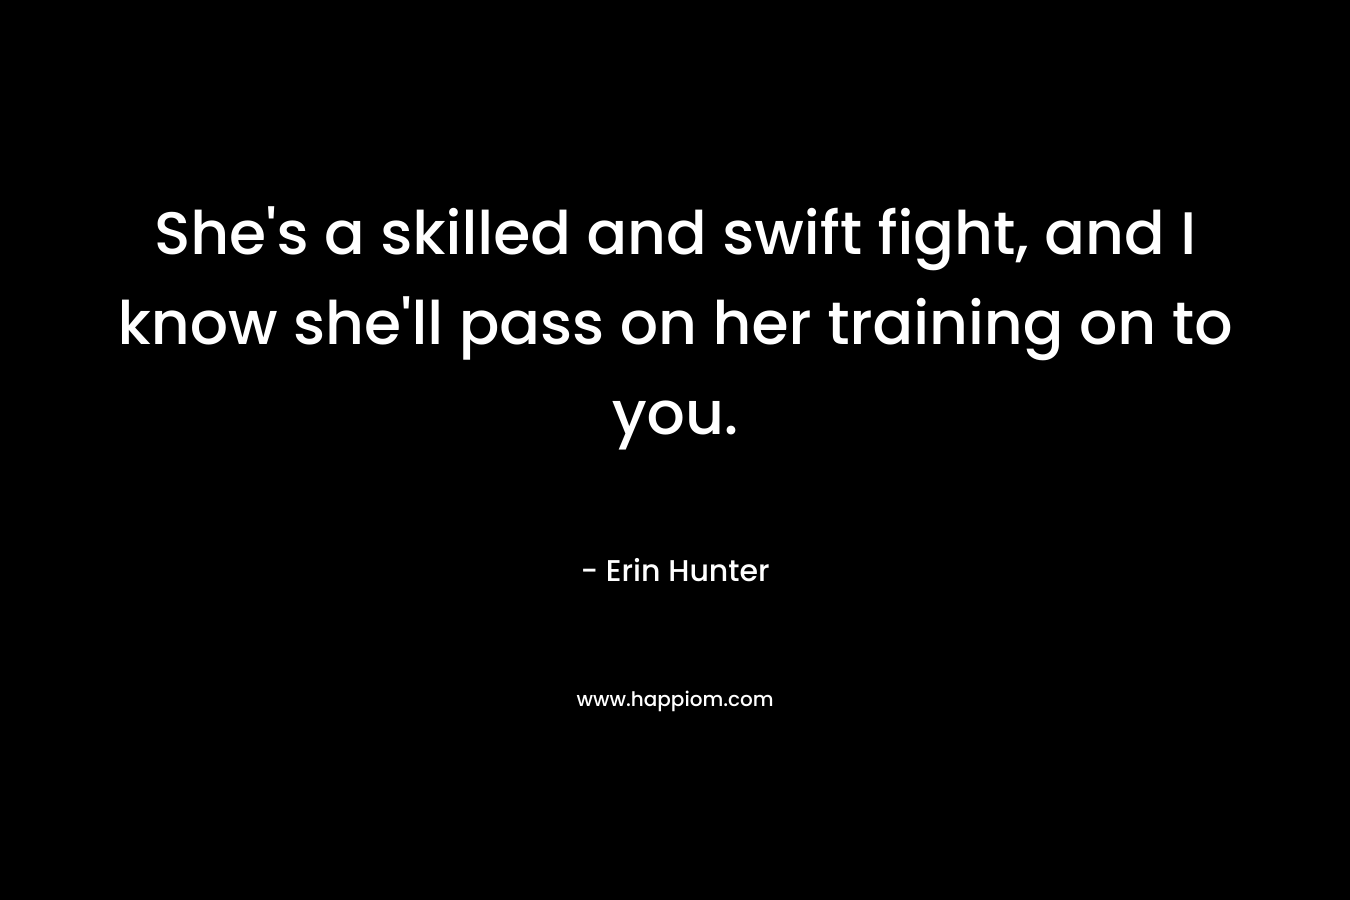 She’s a skilled and swift fight, and I know she’ll pass on her training on to you. – Erin Hunter